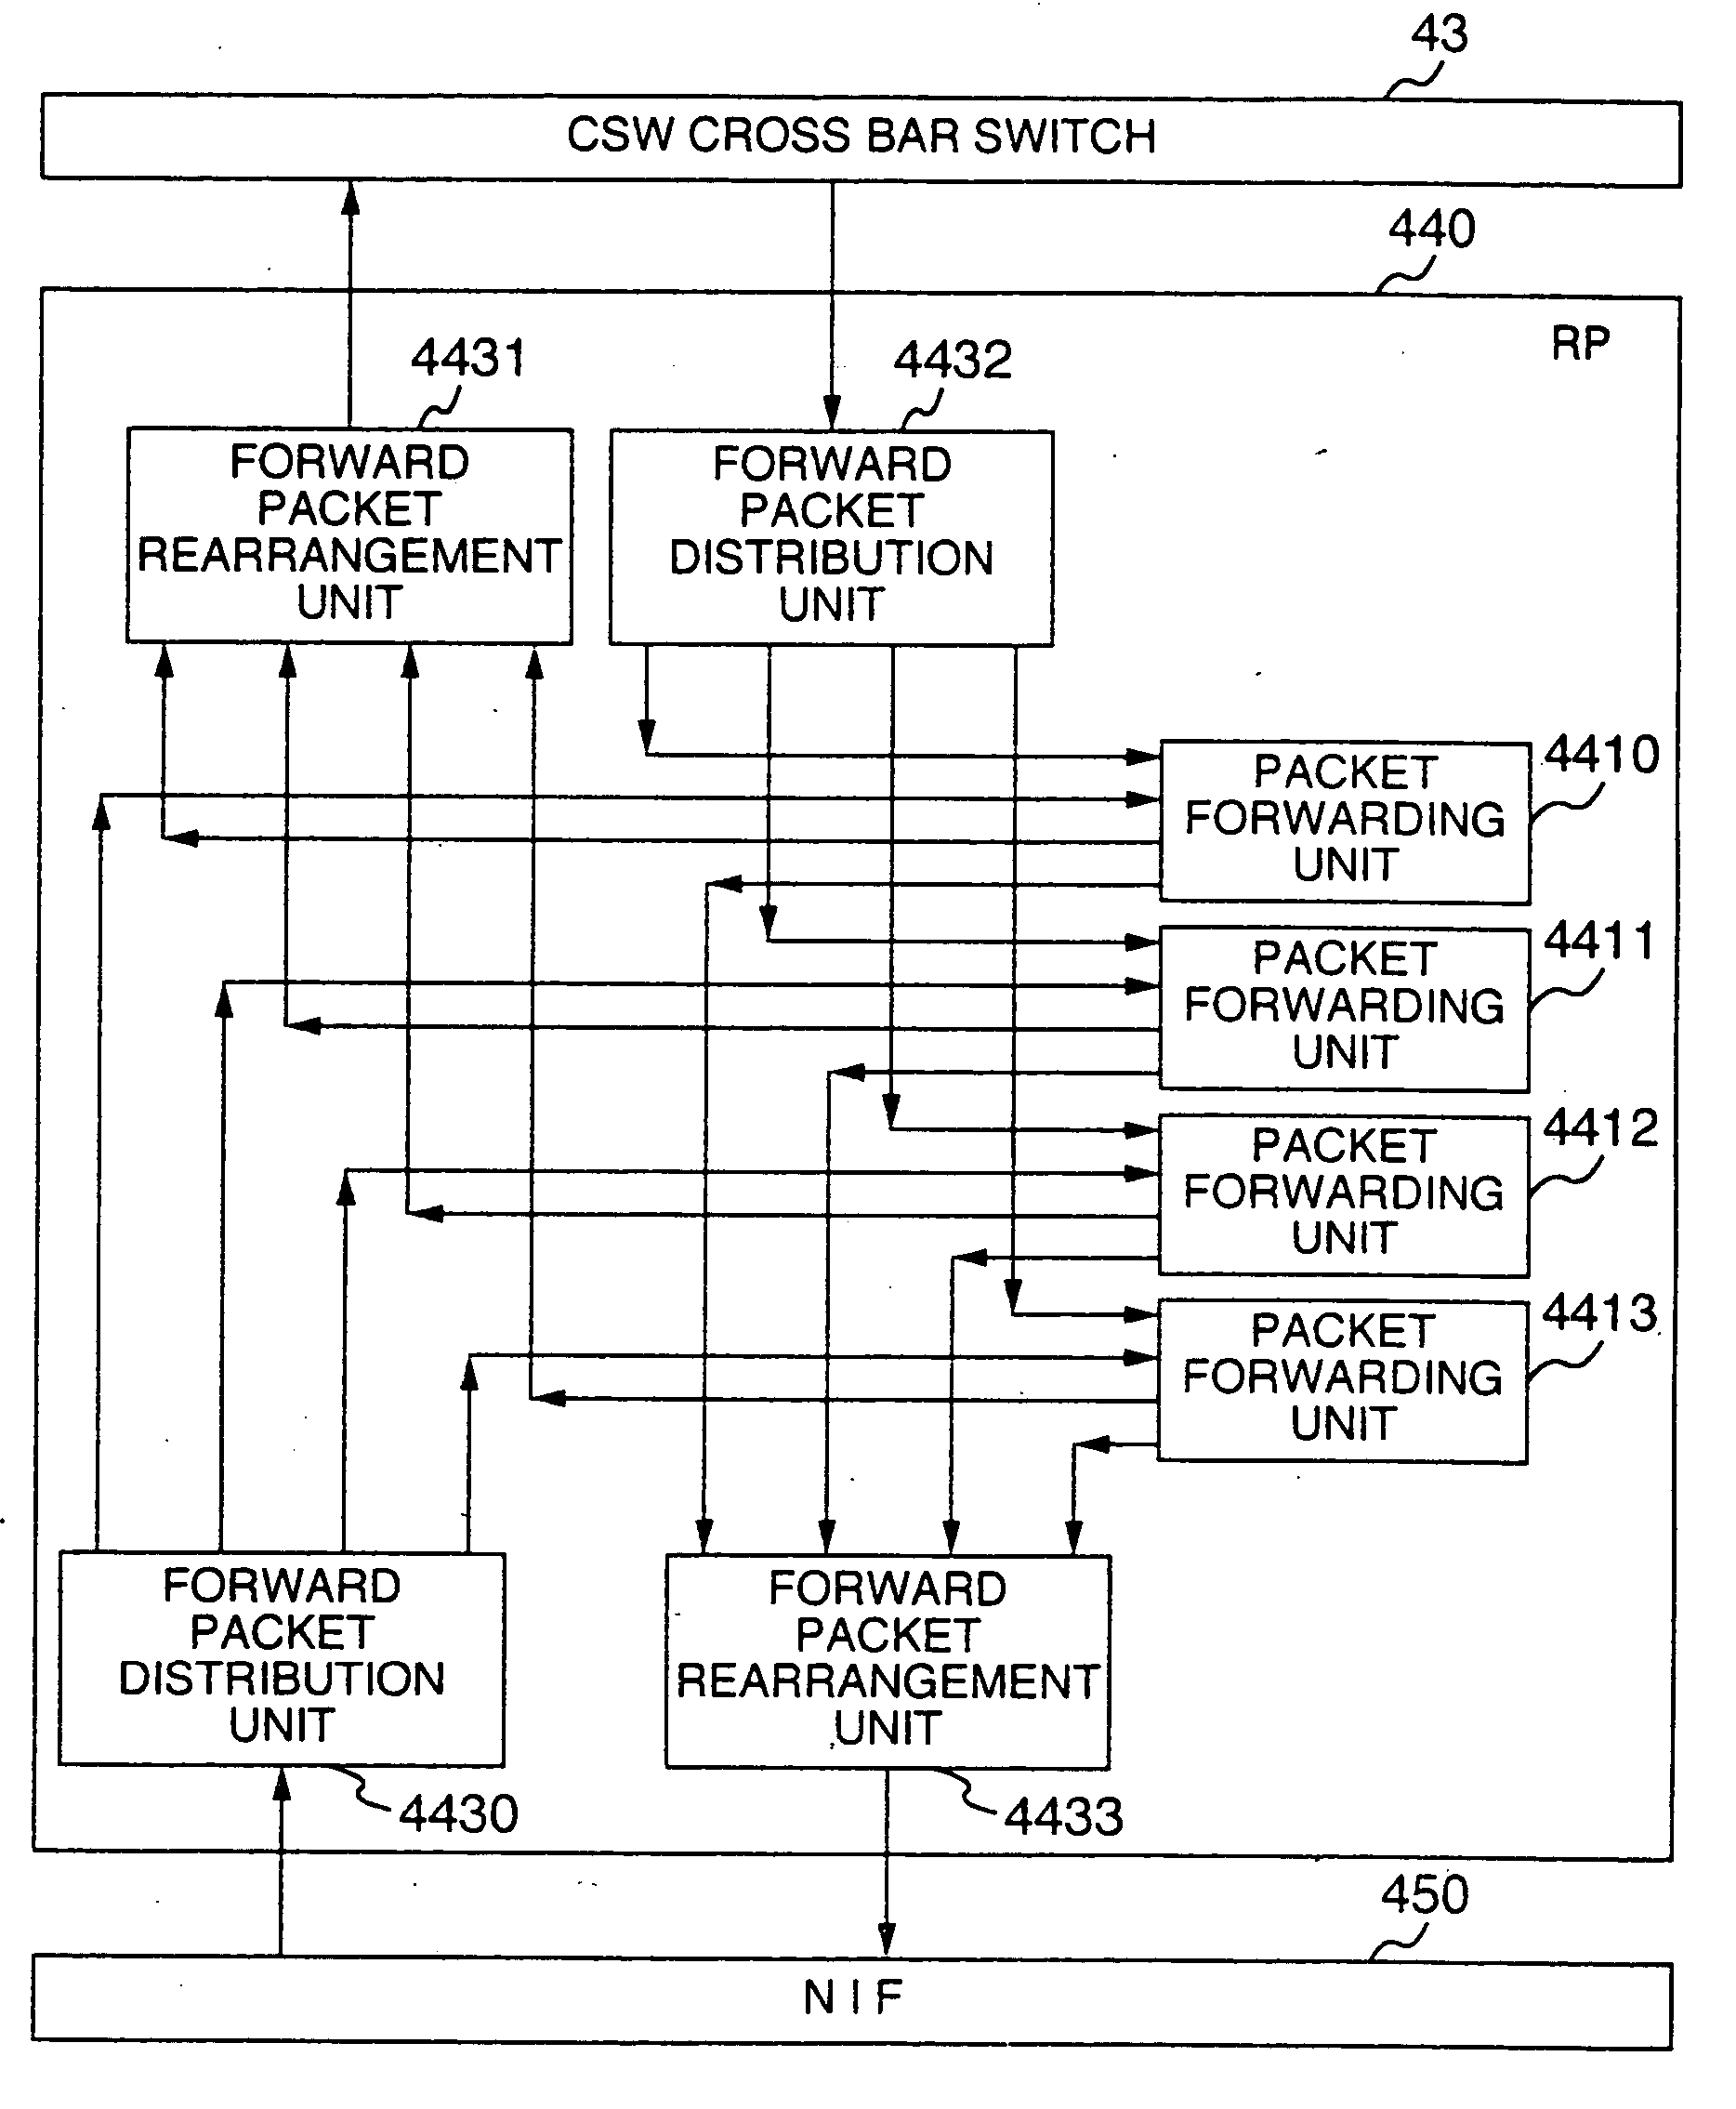 Network routing apparatus